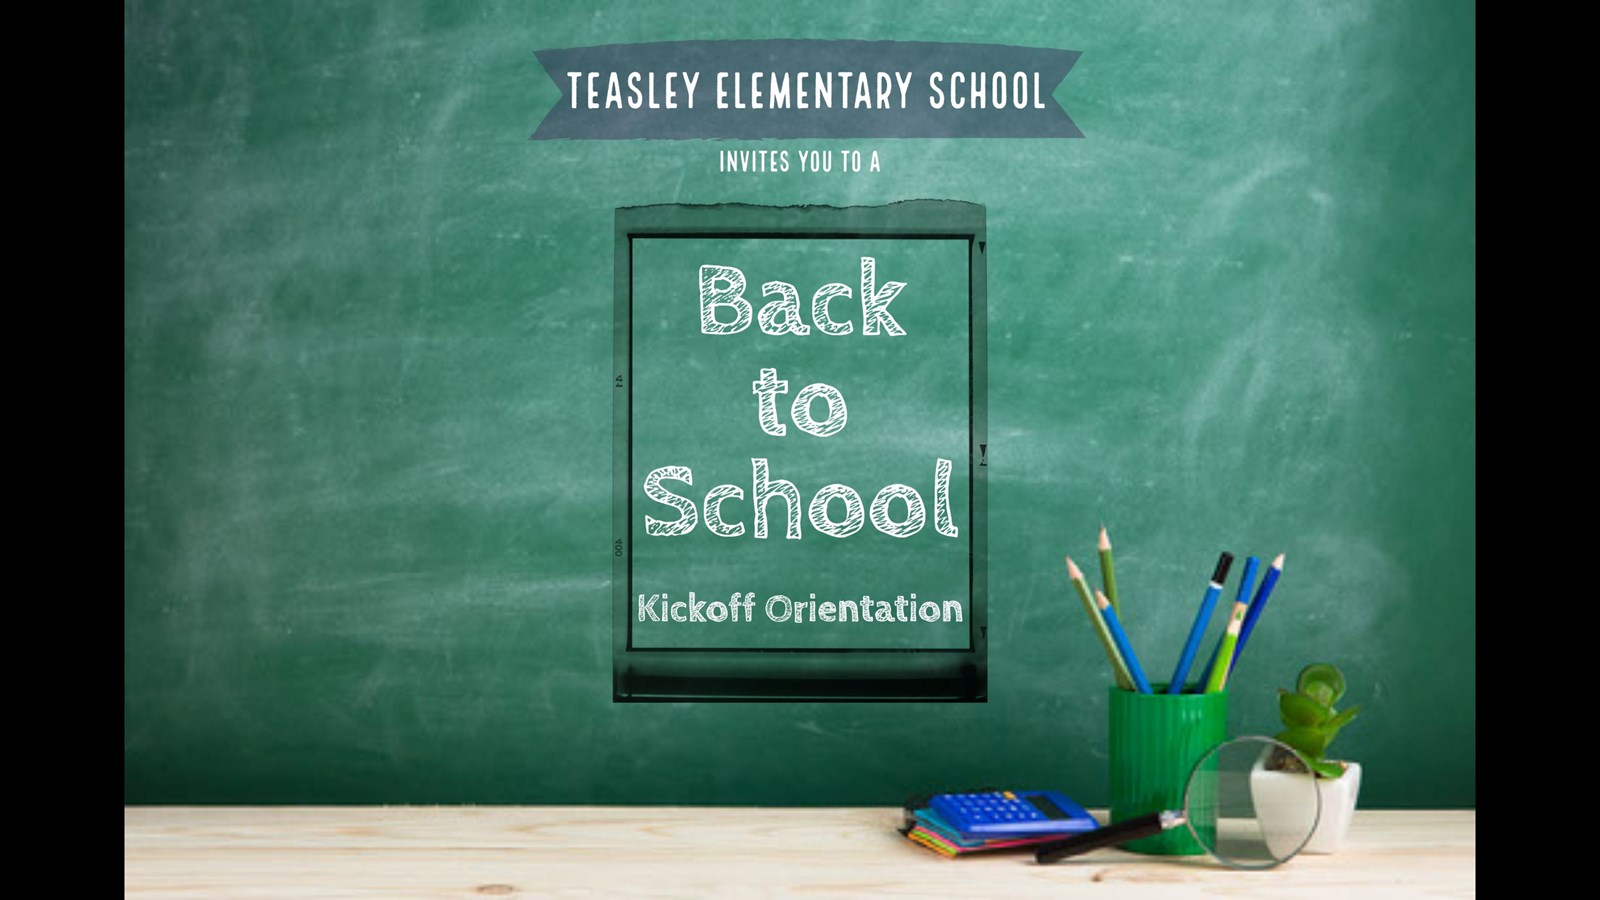 Teasley Elementary School Invites You to a Back to School Kickoff Orientation